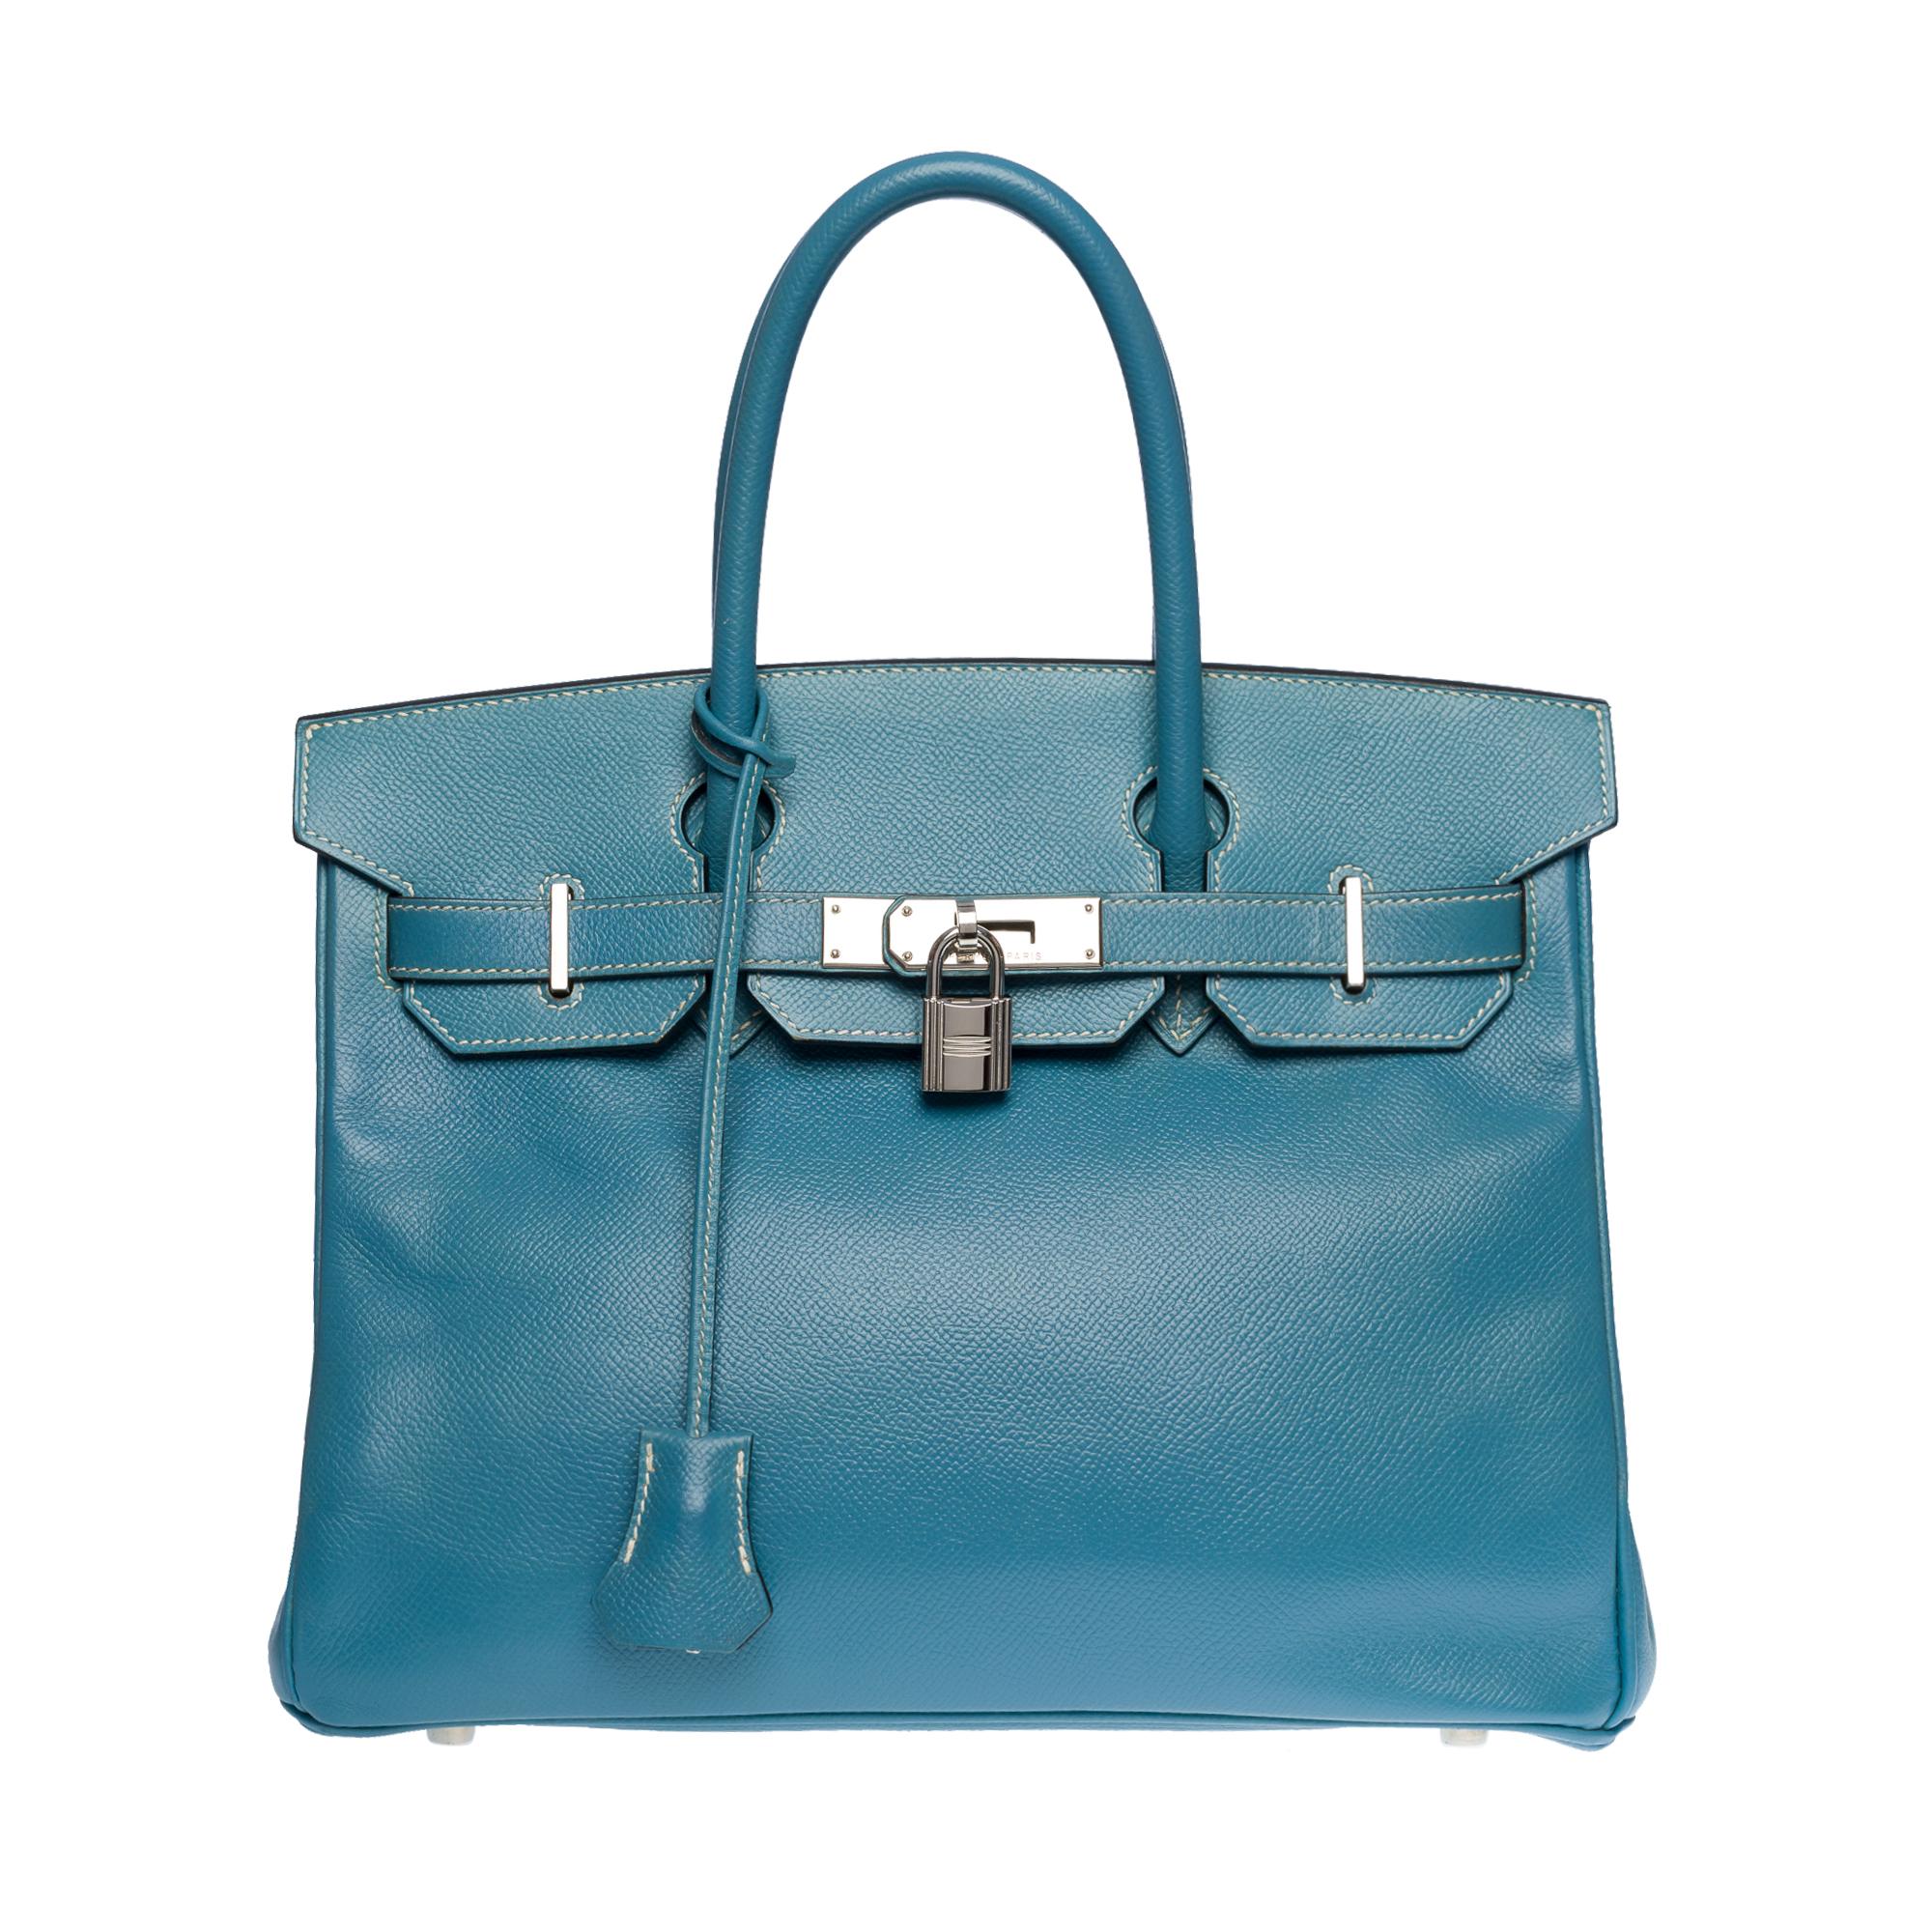 Gorgeous Hermes Birkin 30 handbag in Blue Jeans Epsom with white stitching, Palladium Silver metal hardware, double handle in blue leather for a hand wear

Flap closure
Inner lining in blue leather, one zippered pocket, one patch pocket
Signature: